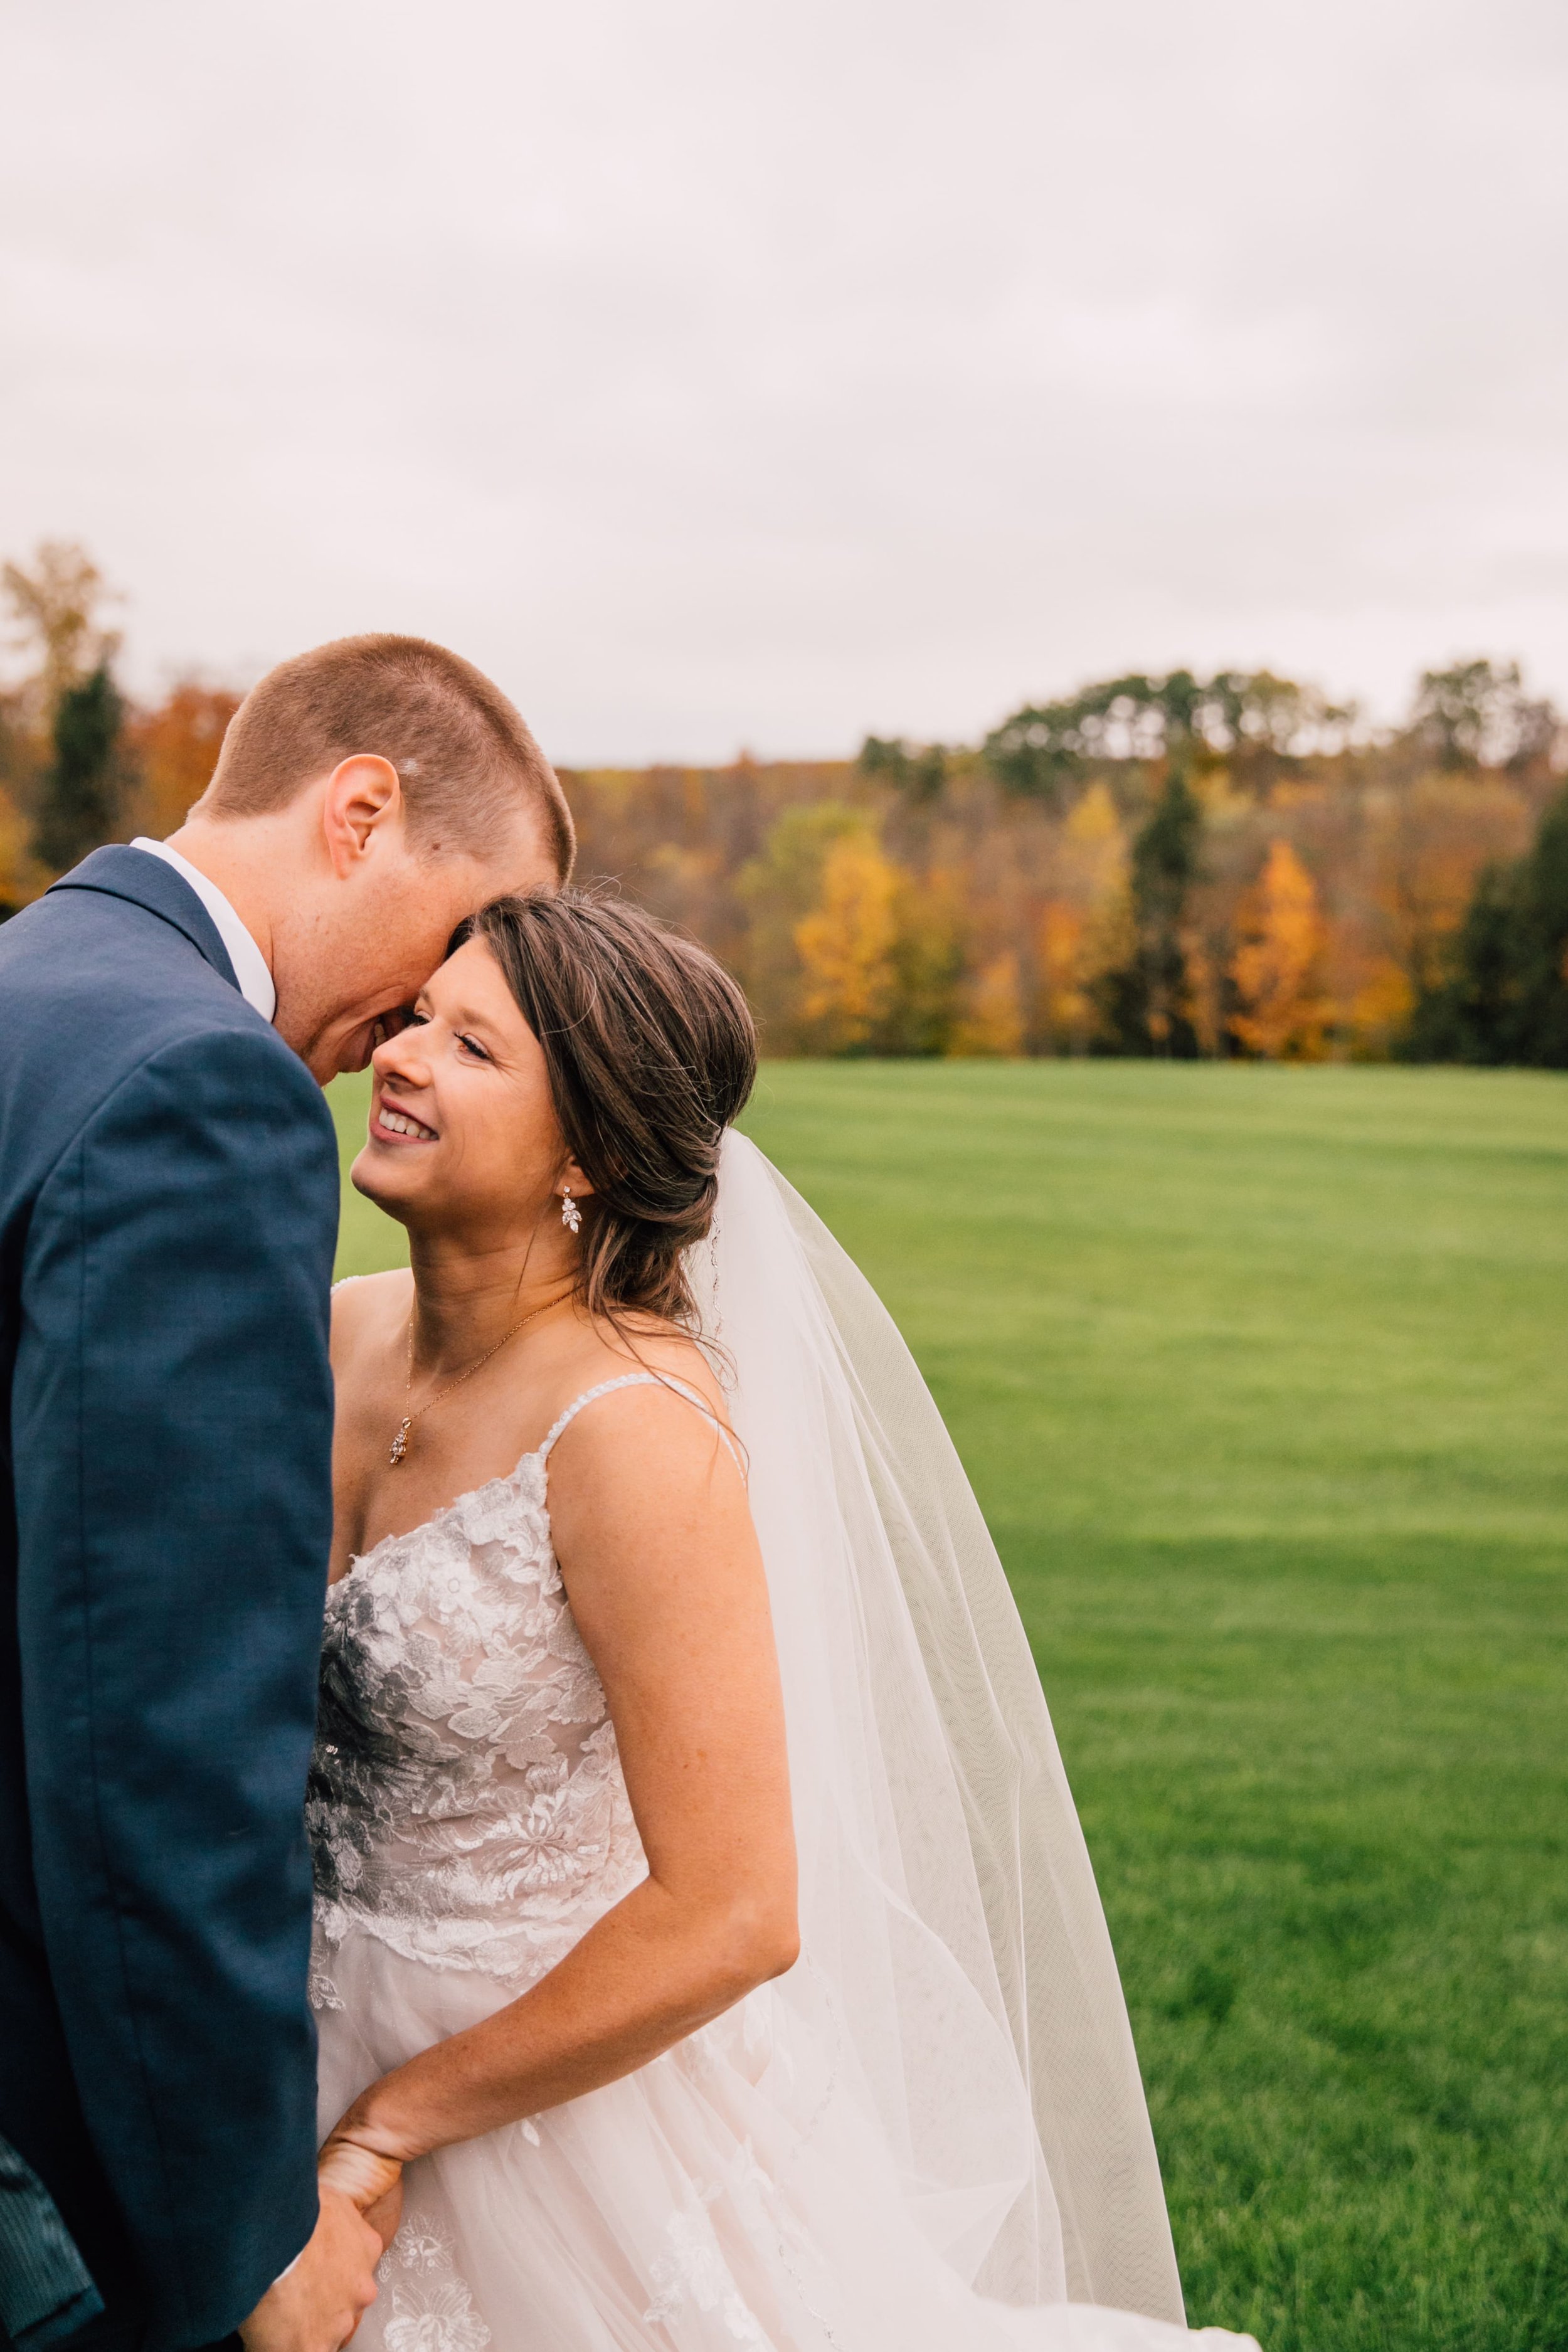  the groom presses his forehead to the side of the bride’s face as she smiles during their fall wedding photos 